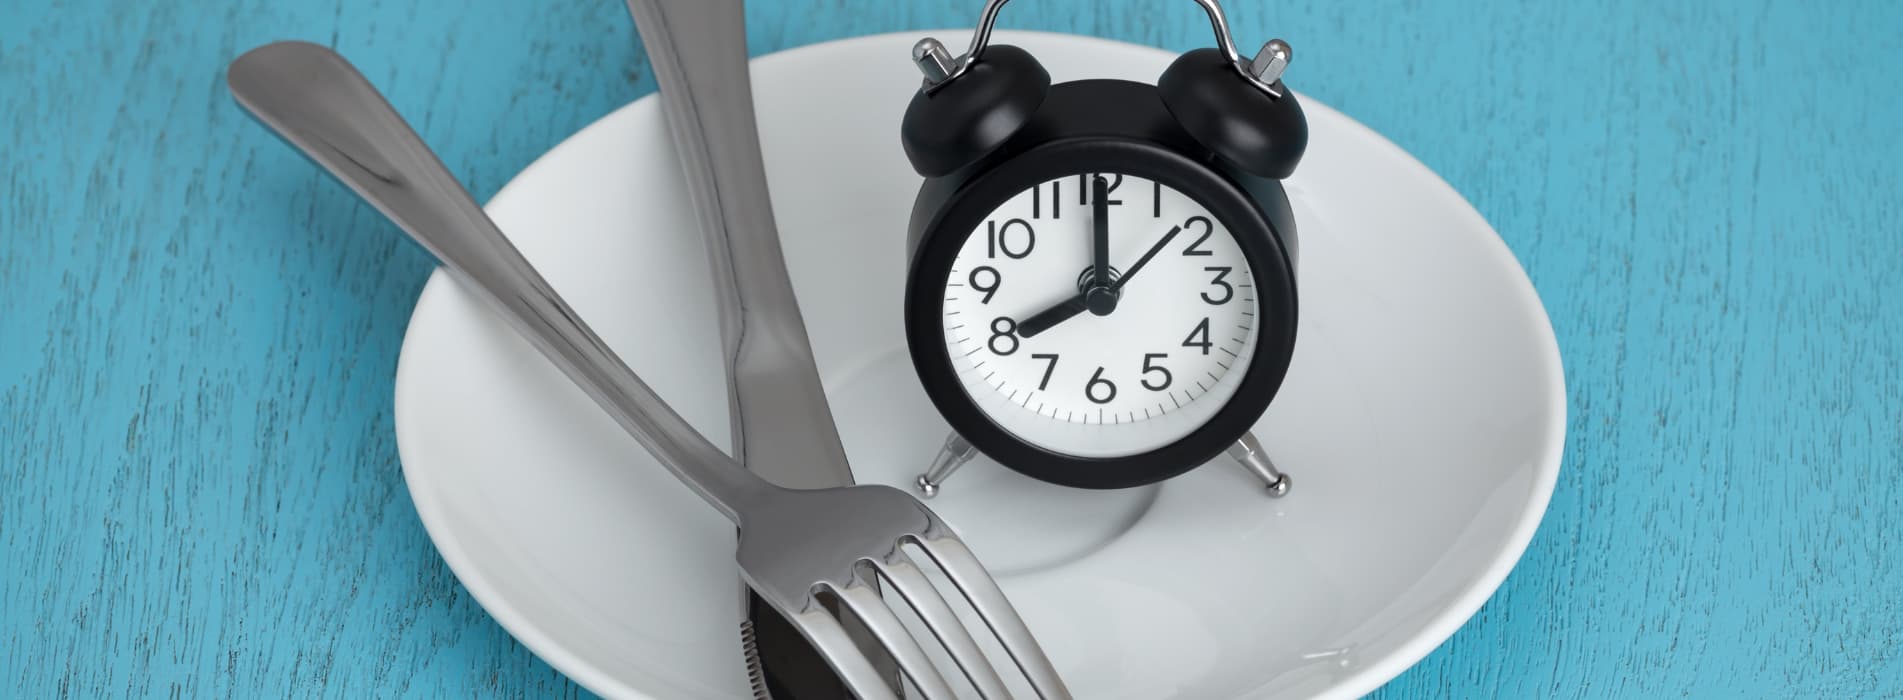 Intermittent Fasting For Weight Loss Strategy